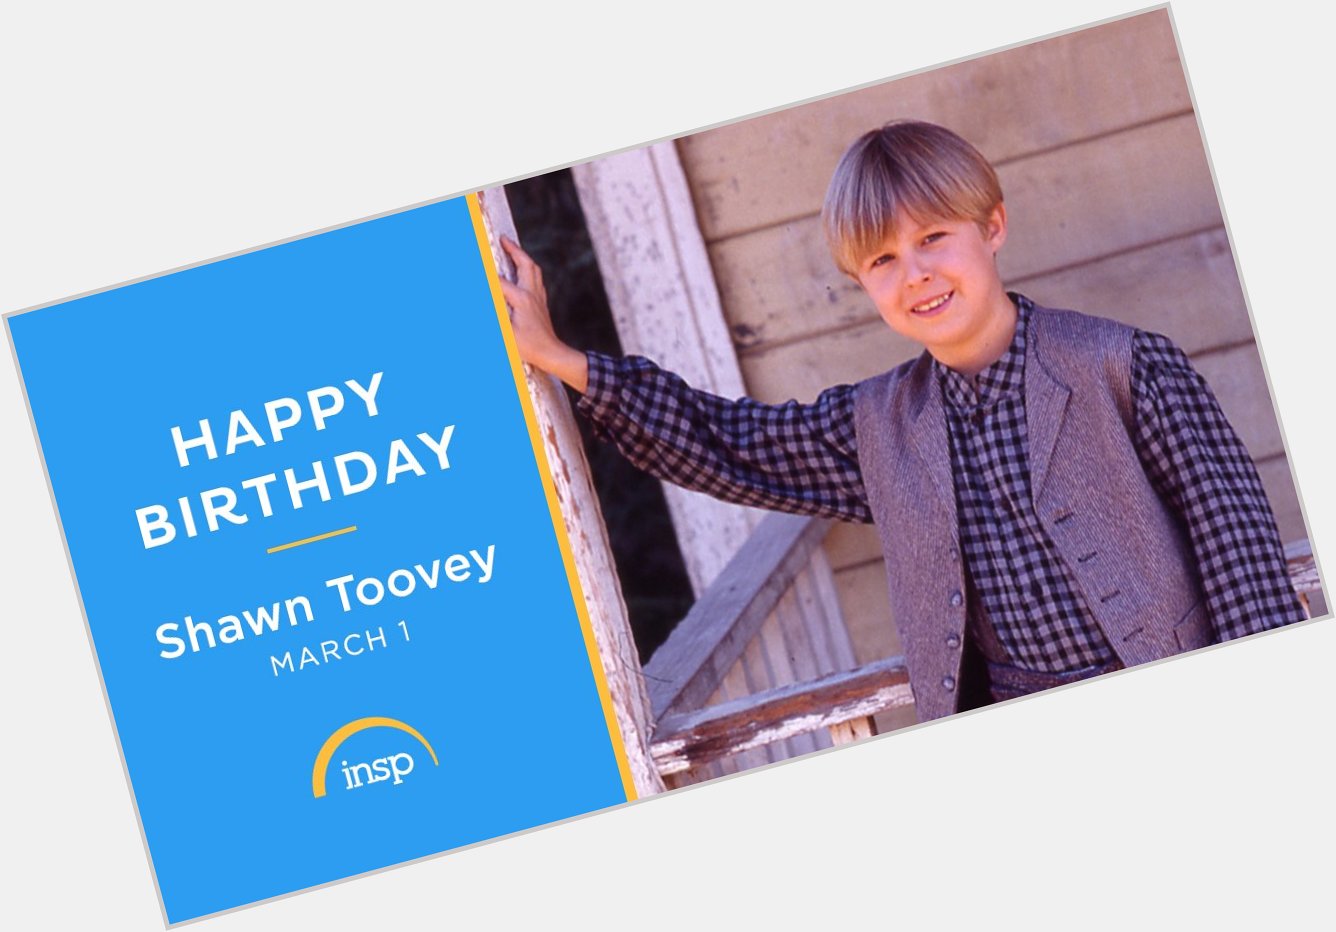 Brian Cooper is all grown up. Happy Birthday, Shawn Toovey!

11p ET | 